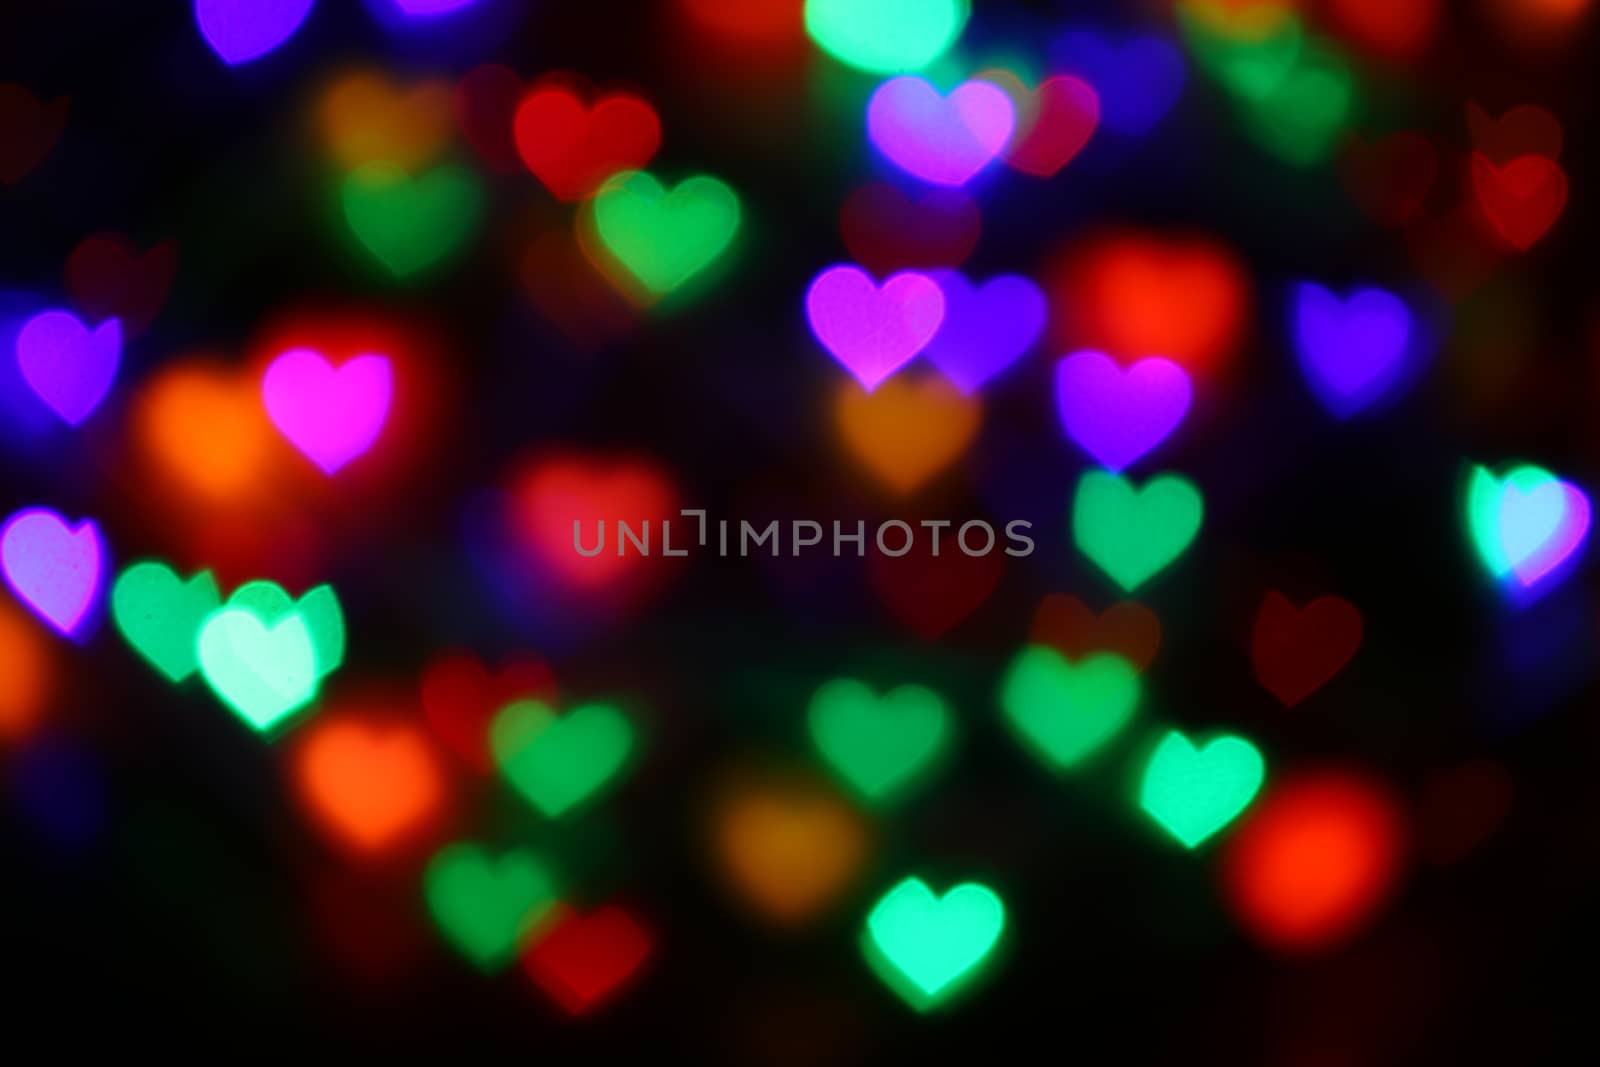 Colorful heart-shaped bokeh on black background lighting bokeh for decoration at night backdrop wallpaper blur valentine, Love Pictures background, Lighting heart shaped soft night abstract